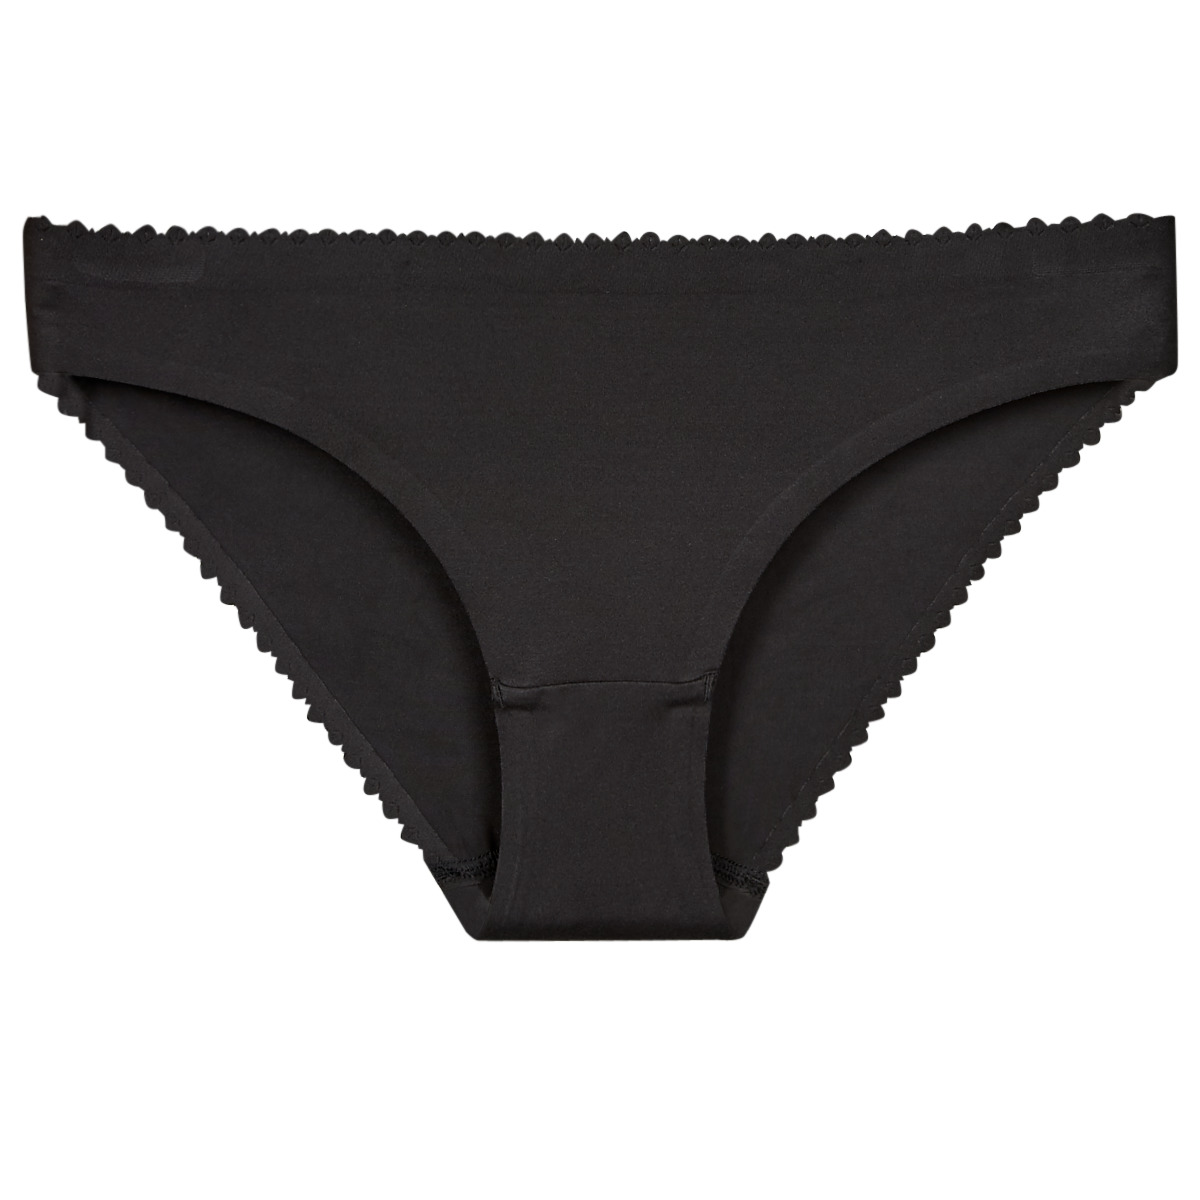 DIM SEXY FASHION X2 Black / White - Fast delivery  Spartoo Europe ! - Underwear  Knickers/panties Women 22,00 €